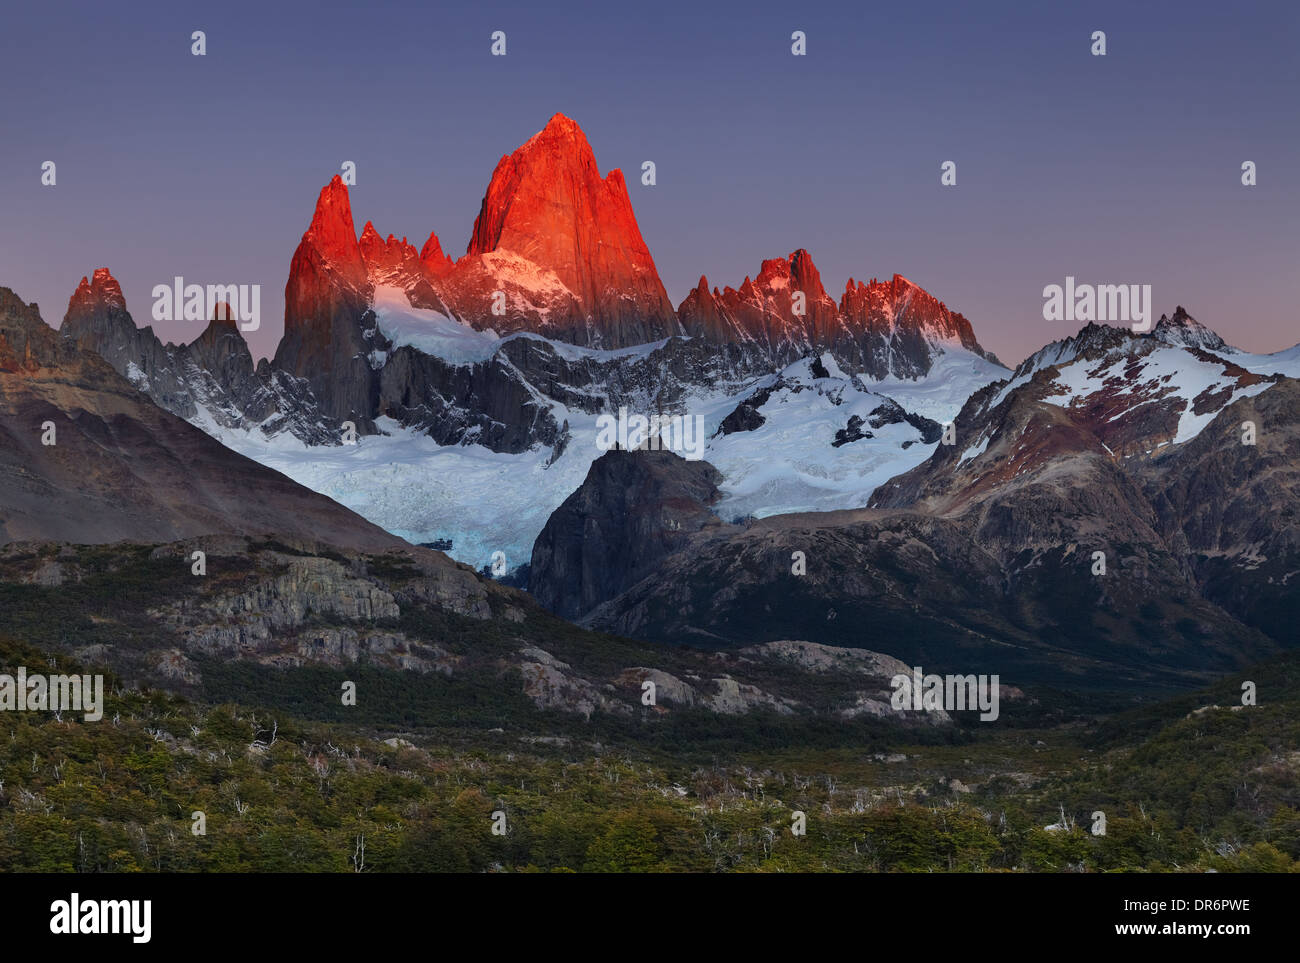 Mount Fitz Roy, alpenglow, first rays of sunrise. Los Glaciares National Park, Patagonia, Argentina Stock Photo